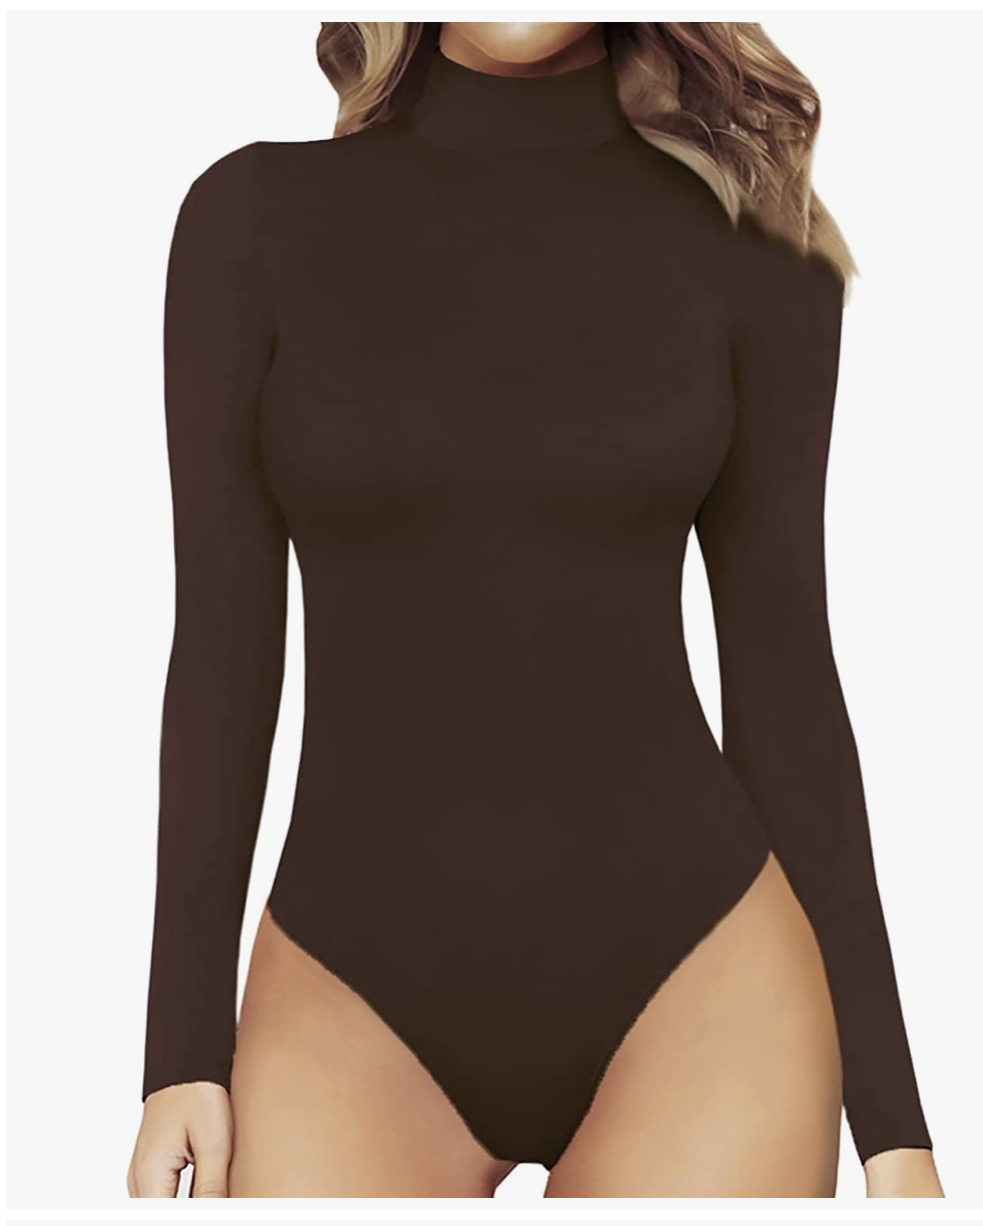 Brown Body Suit